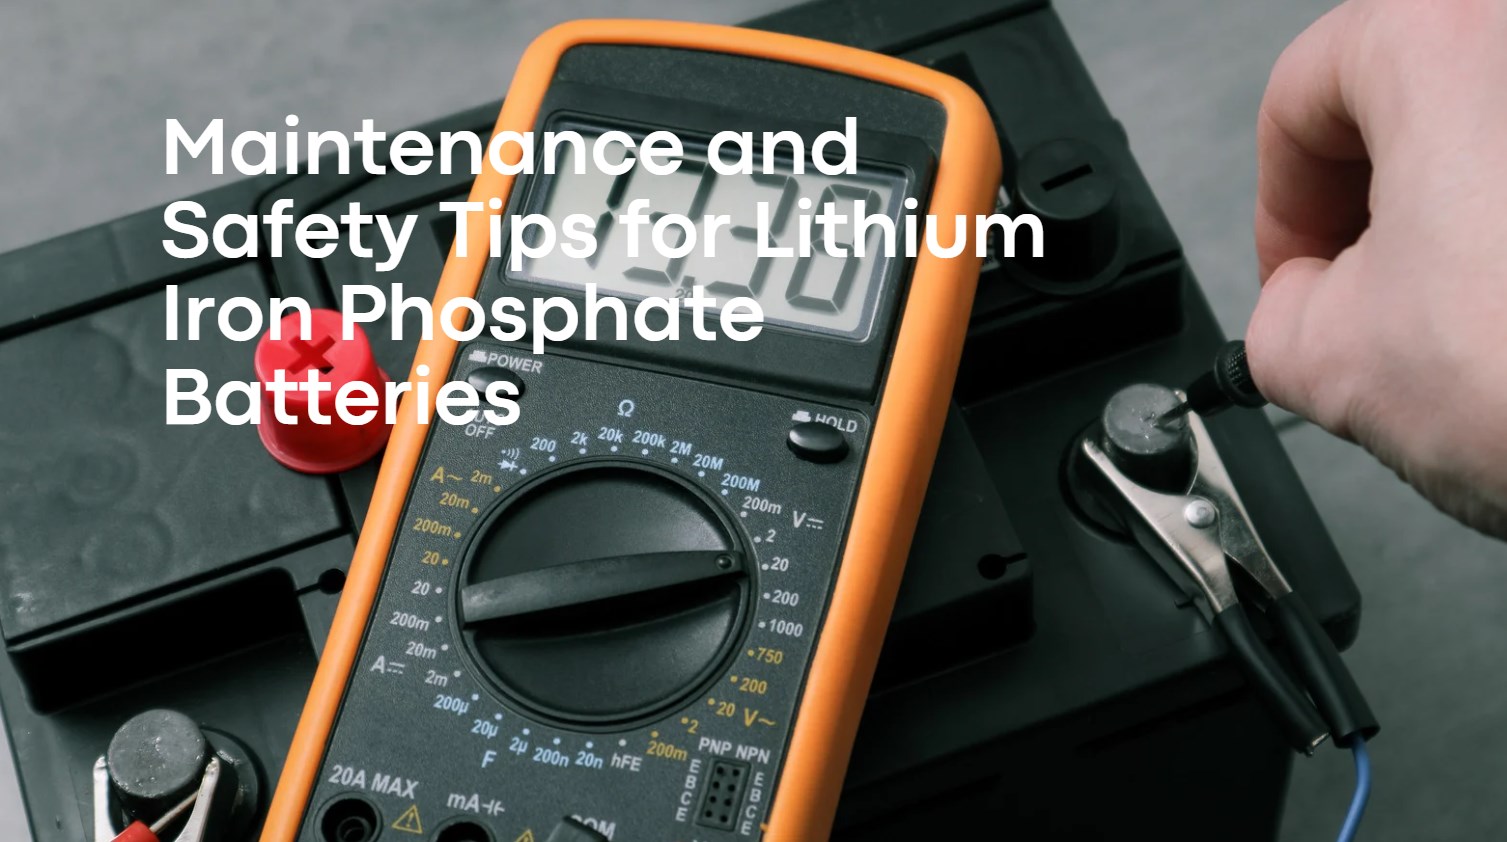 Maintenance and Safety Tips for Lithium Iron Phosphate Batteries